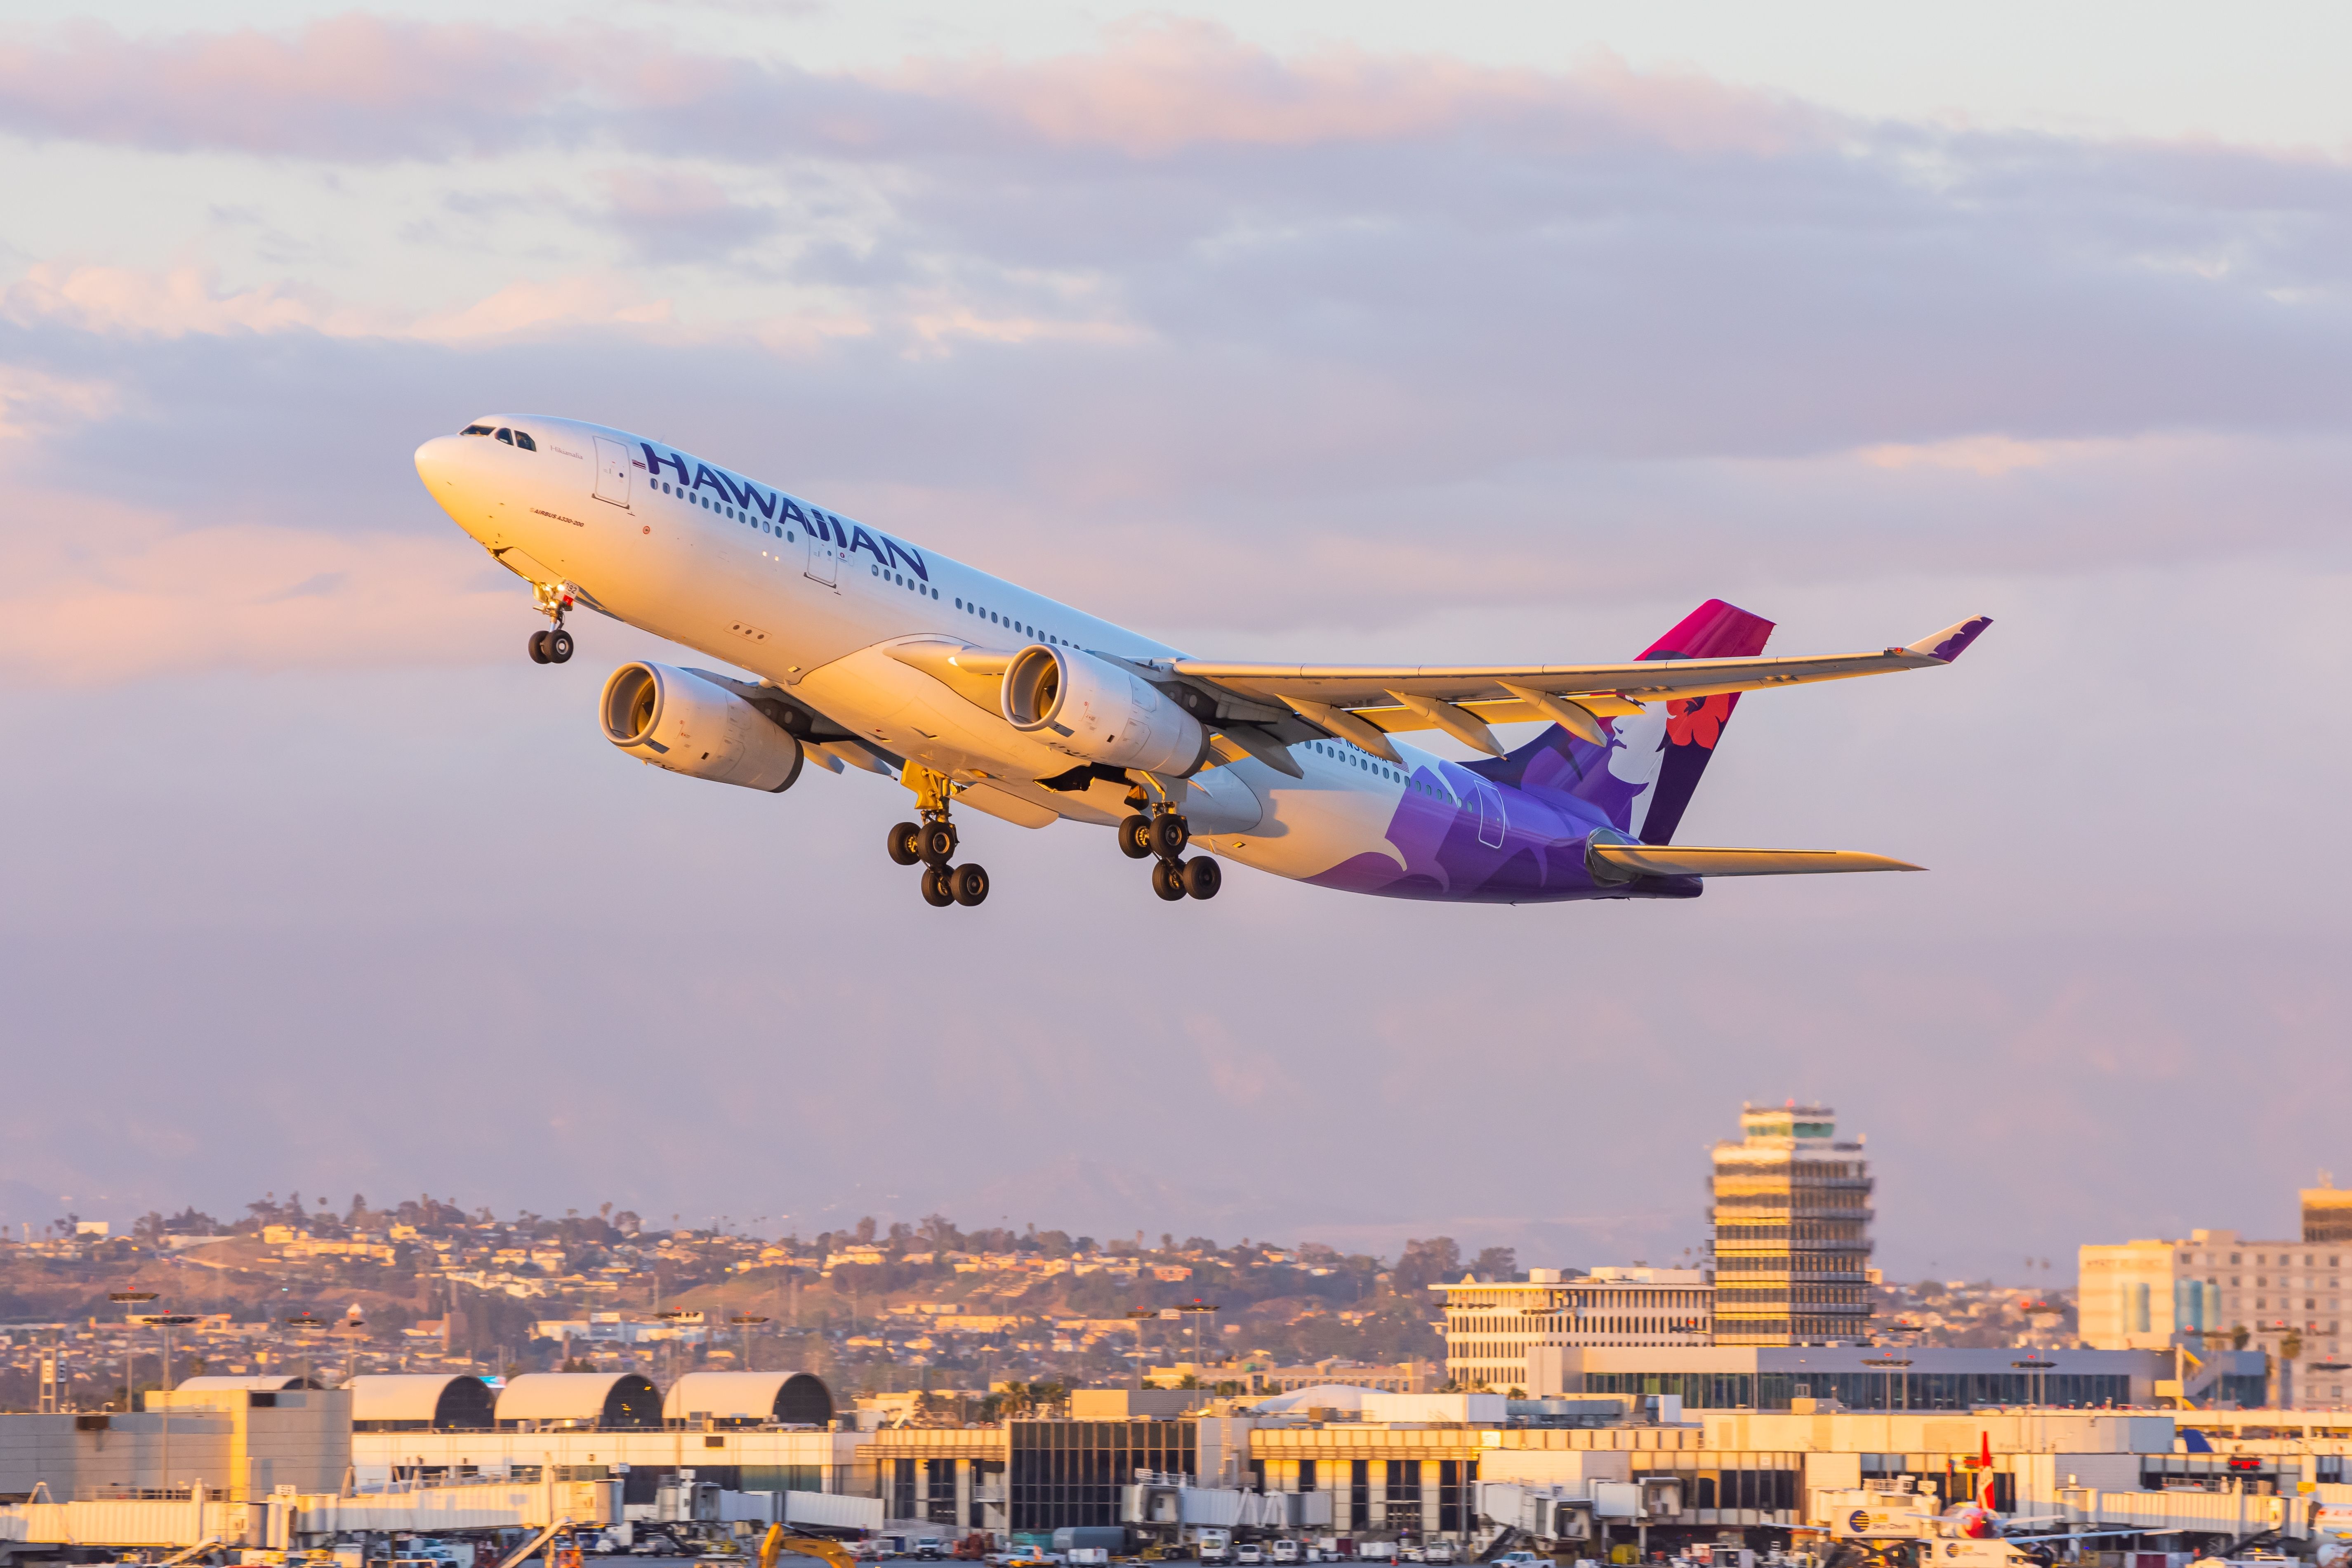 A Hawaiian Airlines Airbus A330 taking off